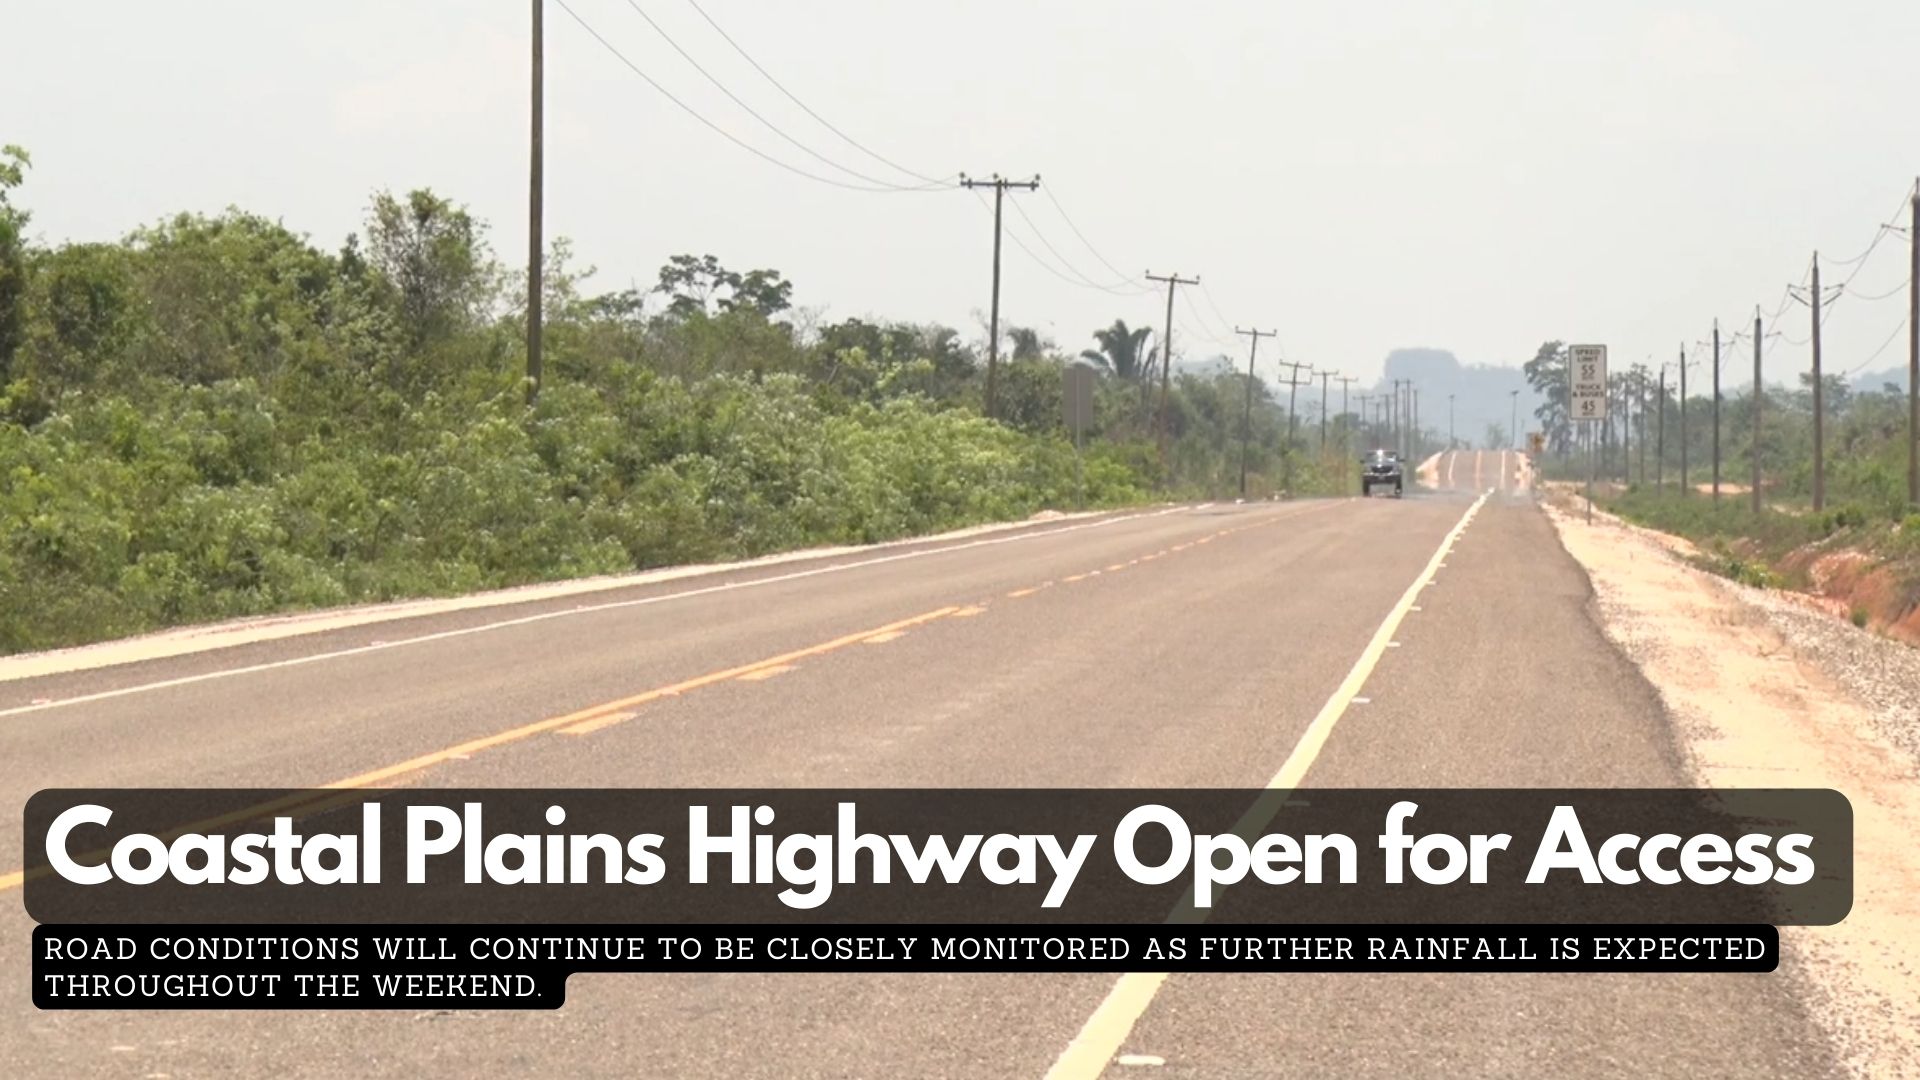 Coastal Plains Highway Open for Access